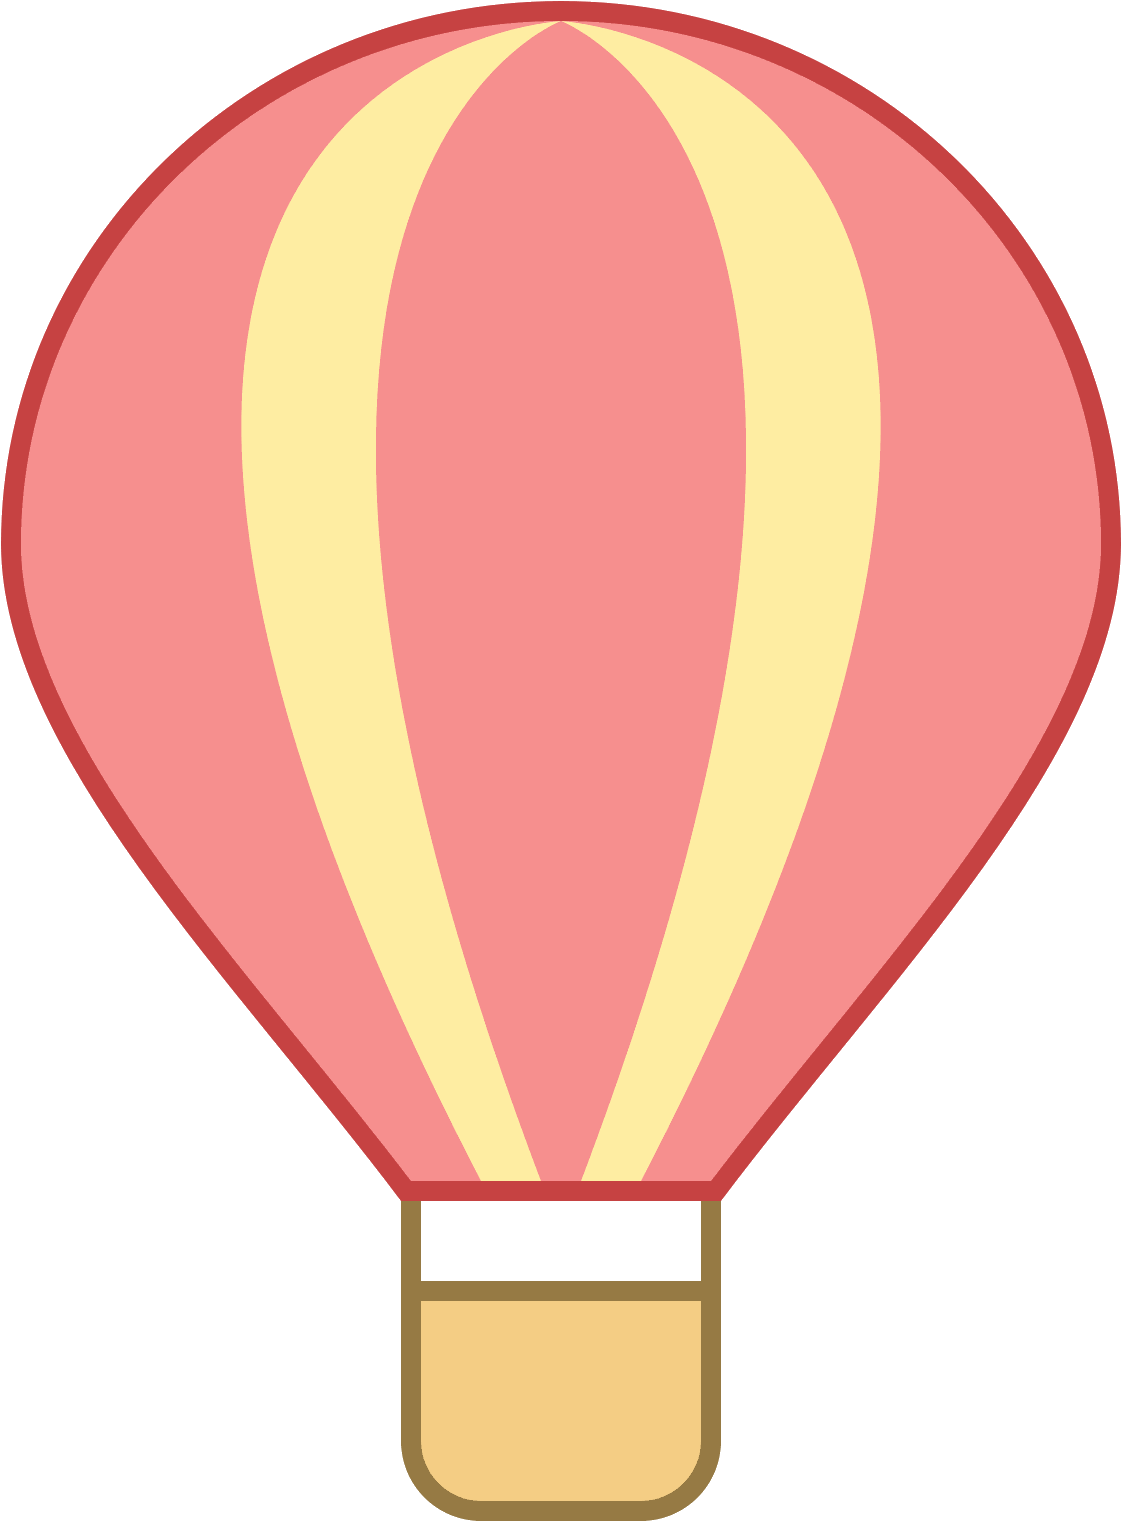 Partly Cloudy Night Icon Download - Hot Air Balloon Icon Png (1600x1600)